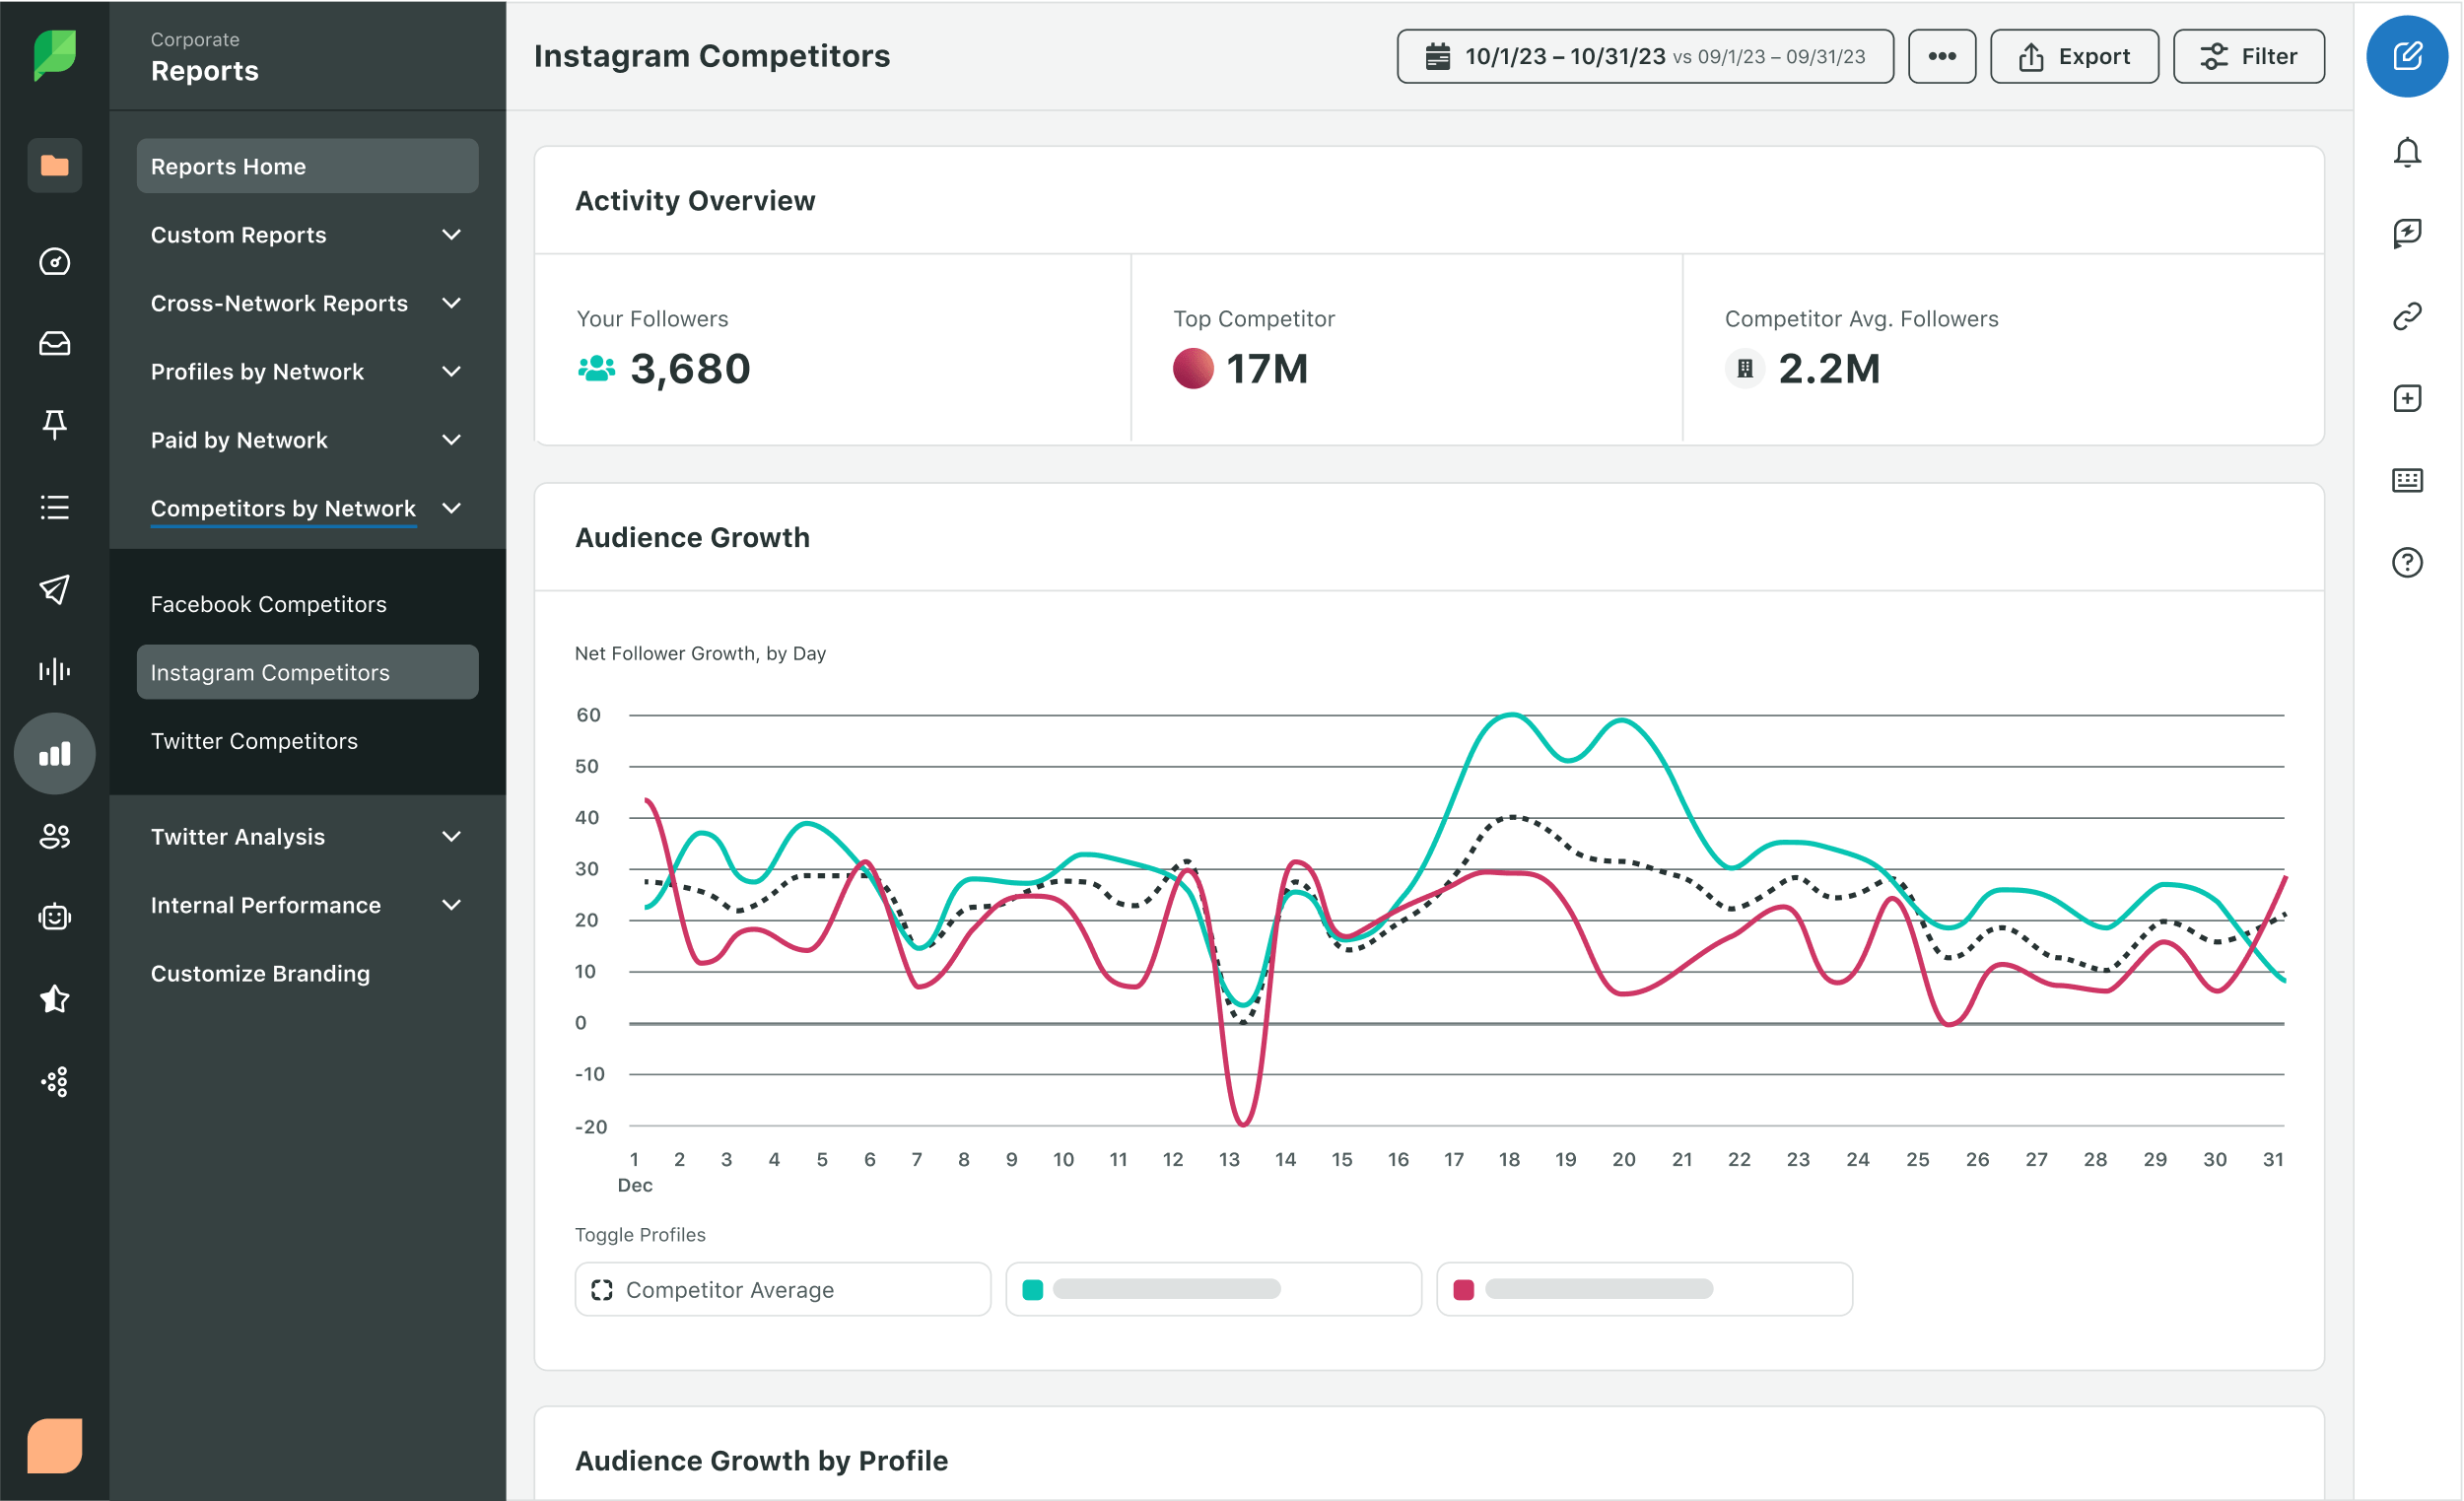 A preview of Sprout Social Instagram Competitor Report that demonstrates competitors' followers and audience growth.